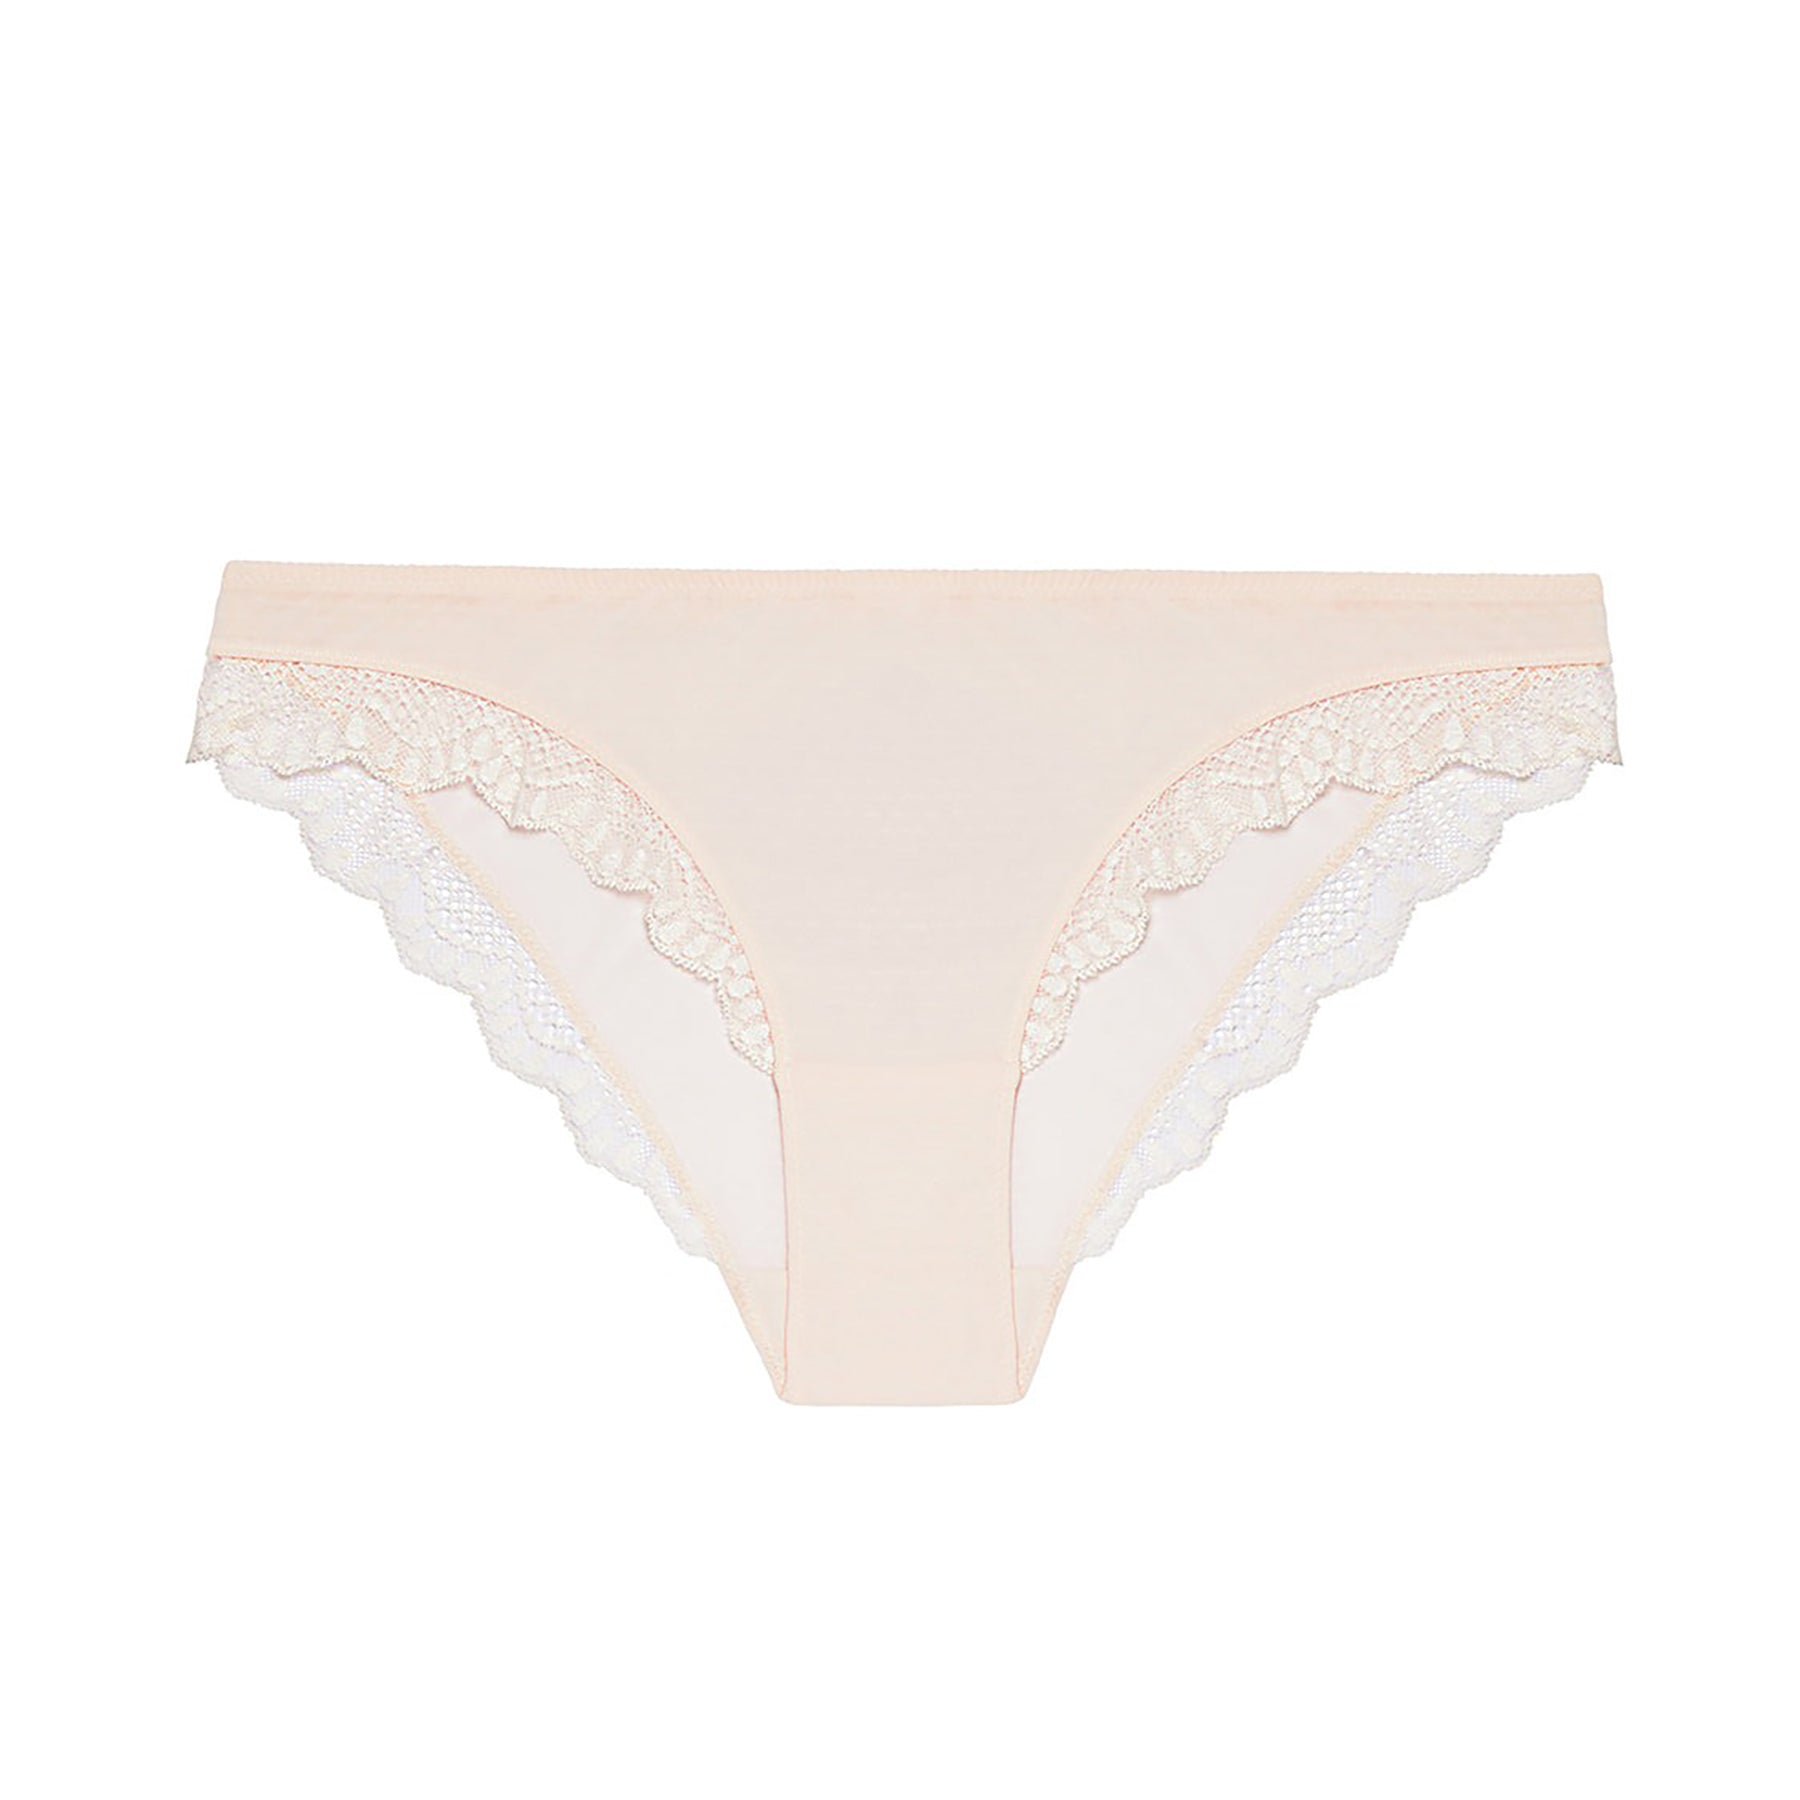 Simone Perele 19y Subtile High Rised Panty PEAU ROSE buy for the